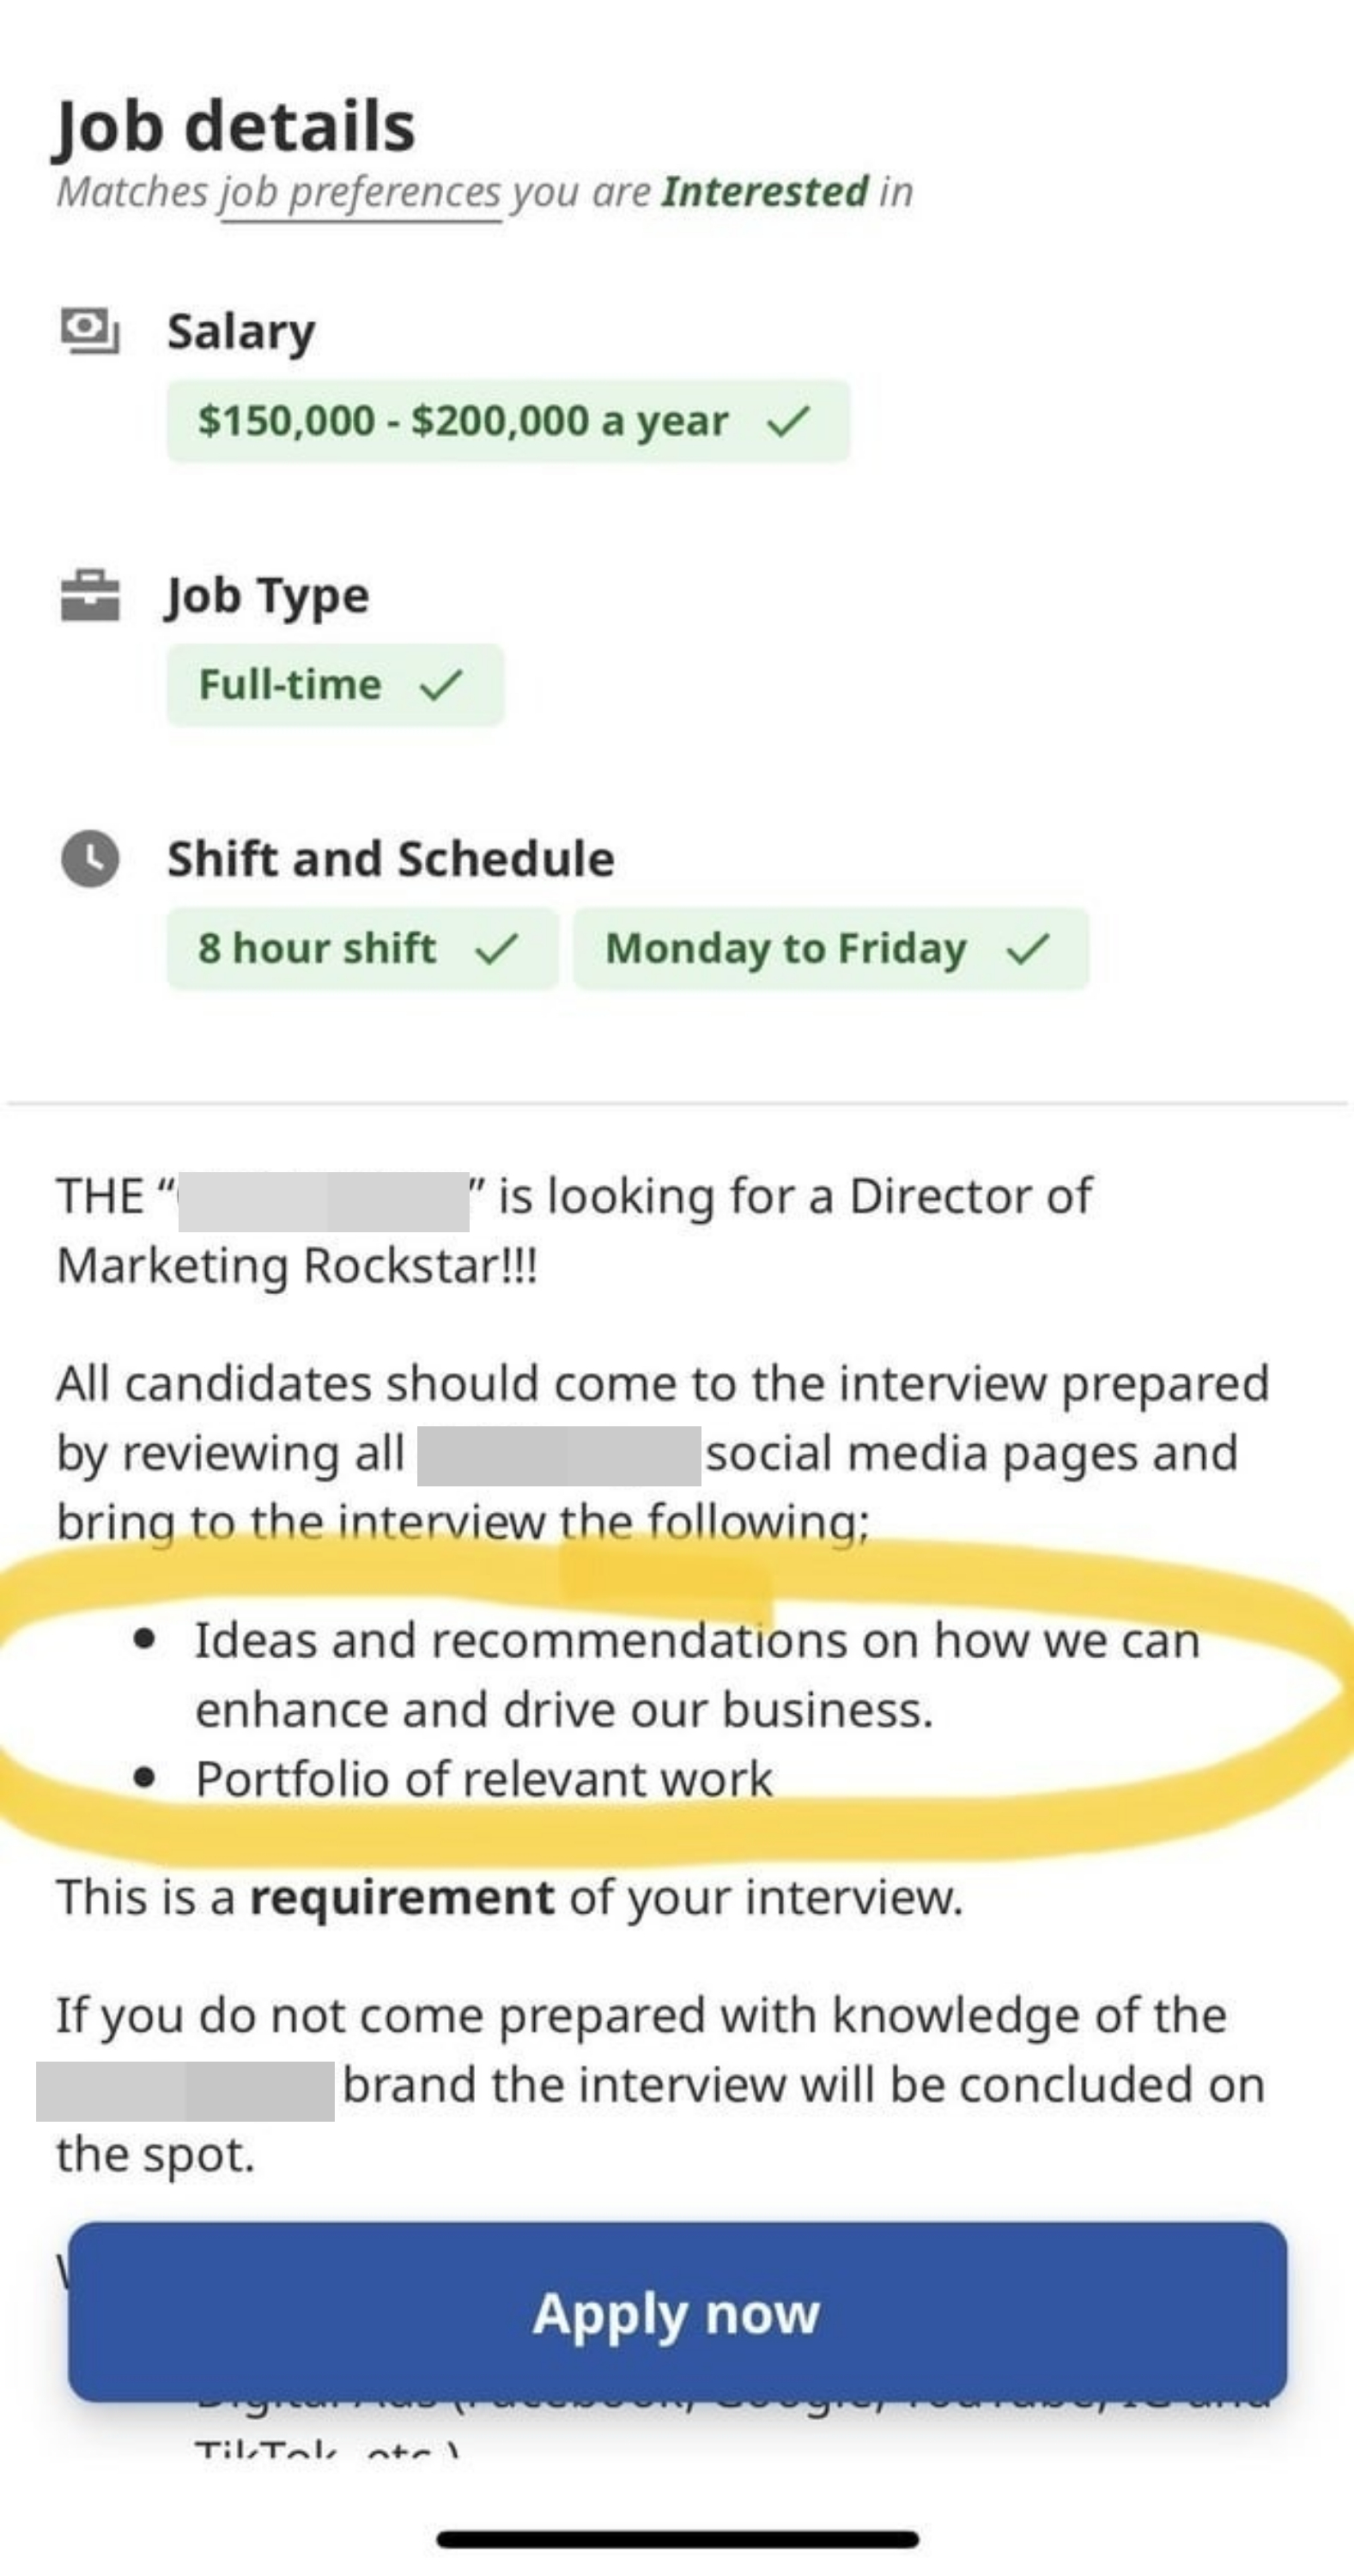 Job is director of marketing, salary is $150–200K, applicants must review all company&#x27;s social media pages and bring to the interview &quot;ideas and recommendations on how we can enhance and drive our business&quot;